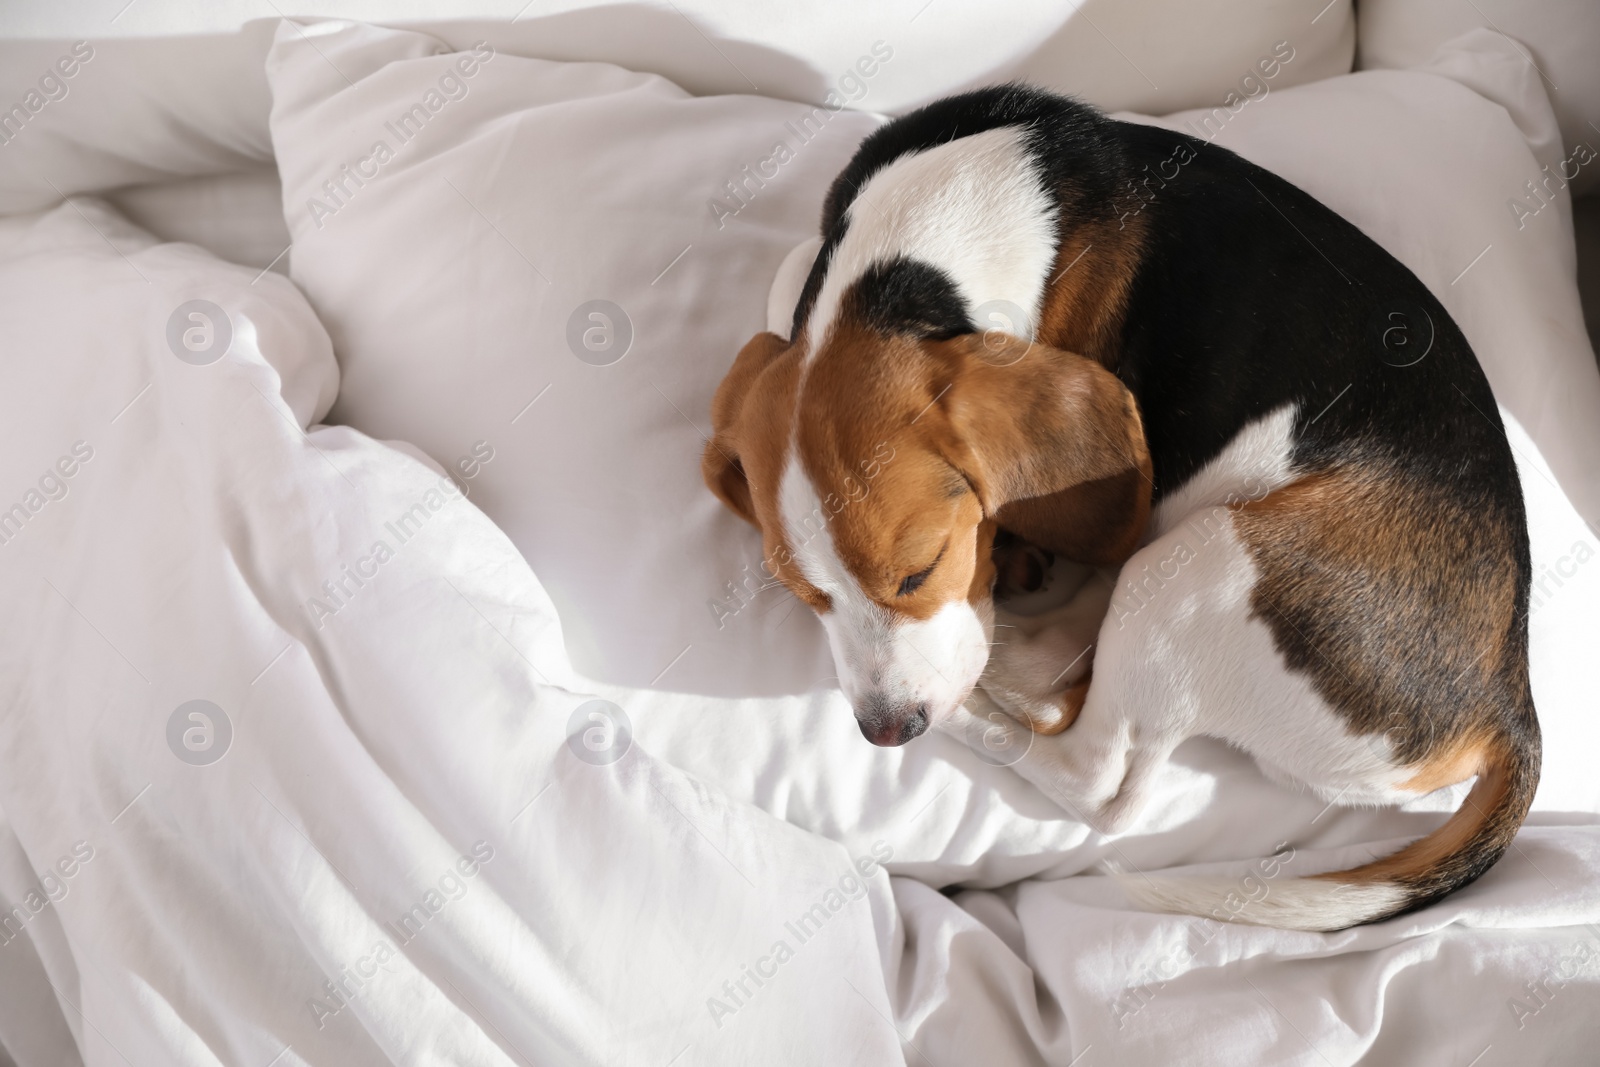 Photo of Cute Beagle puppy sleeping on bed, top view. Adorable pet